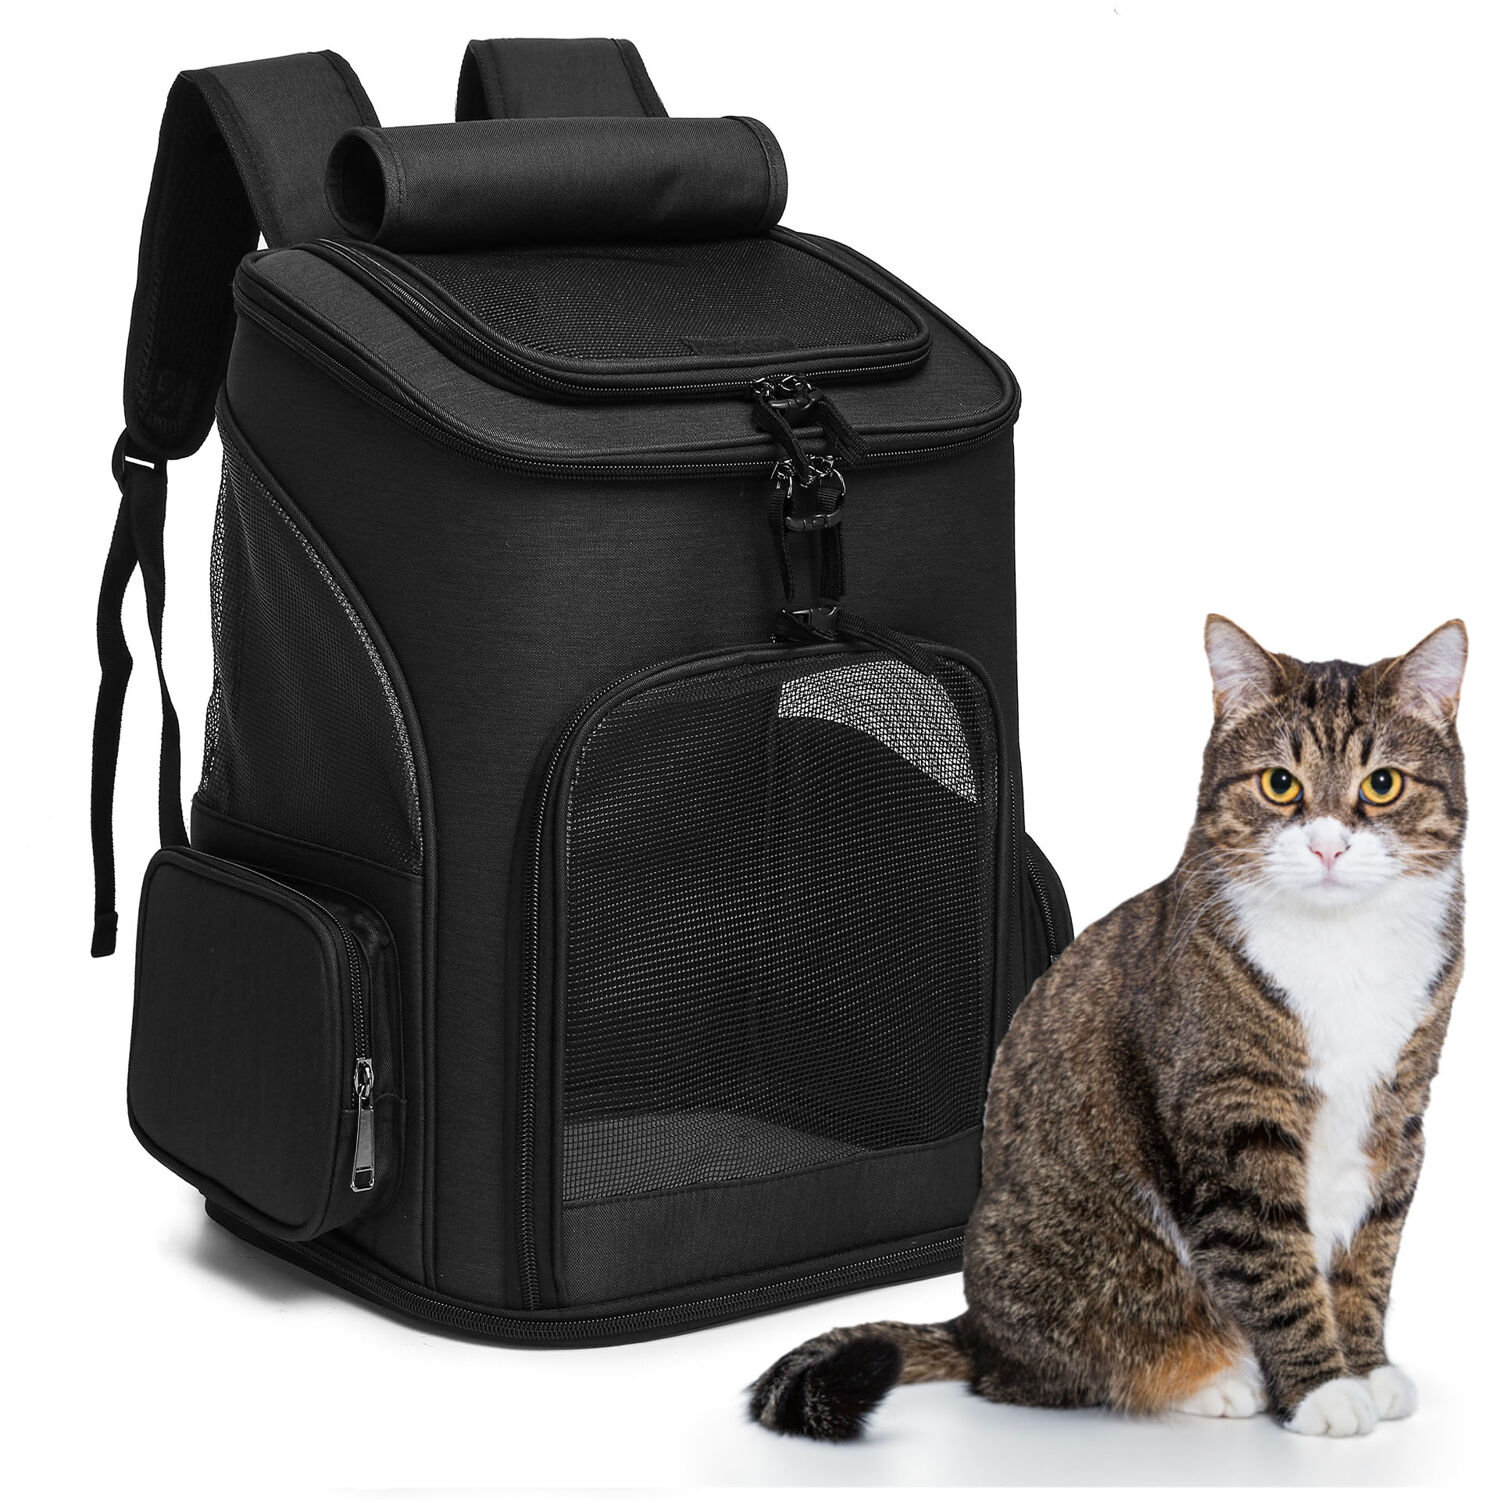 Floof Voyager Top Load Cat Carrier for Travel